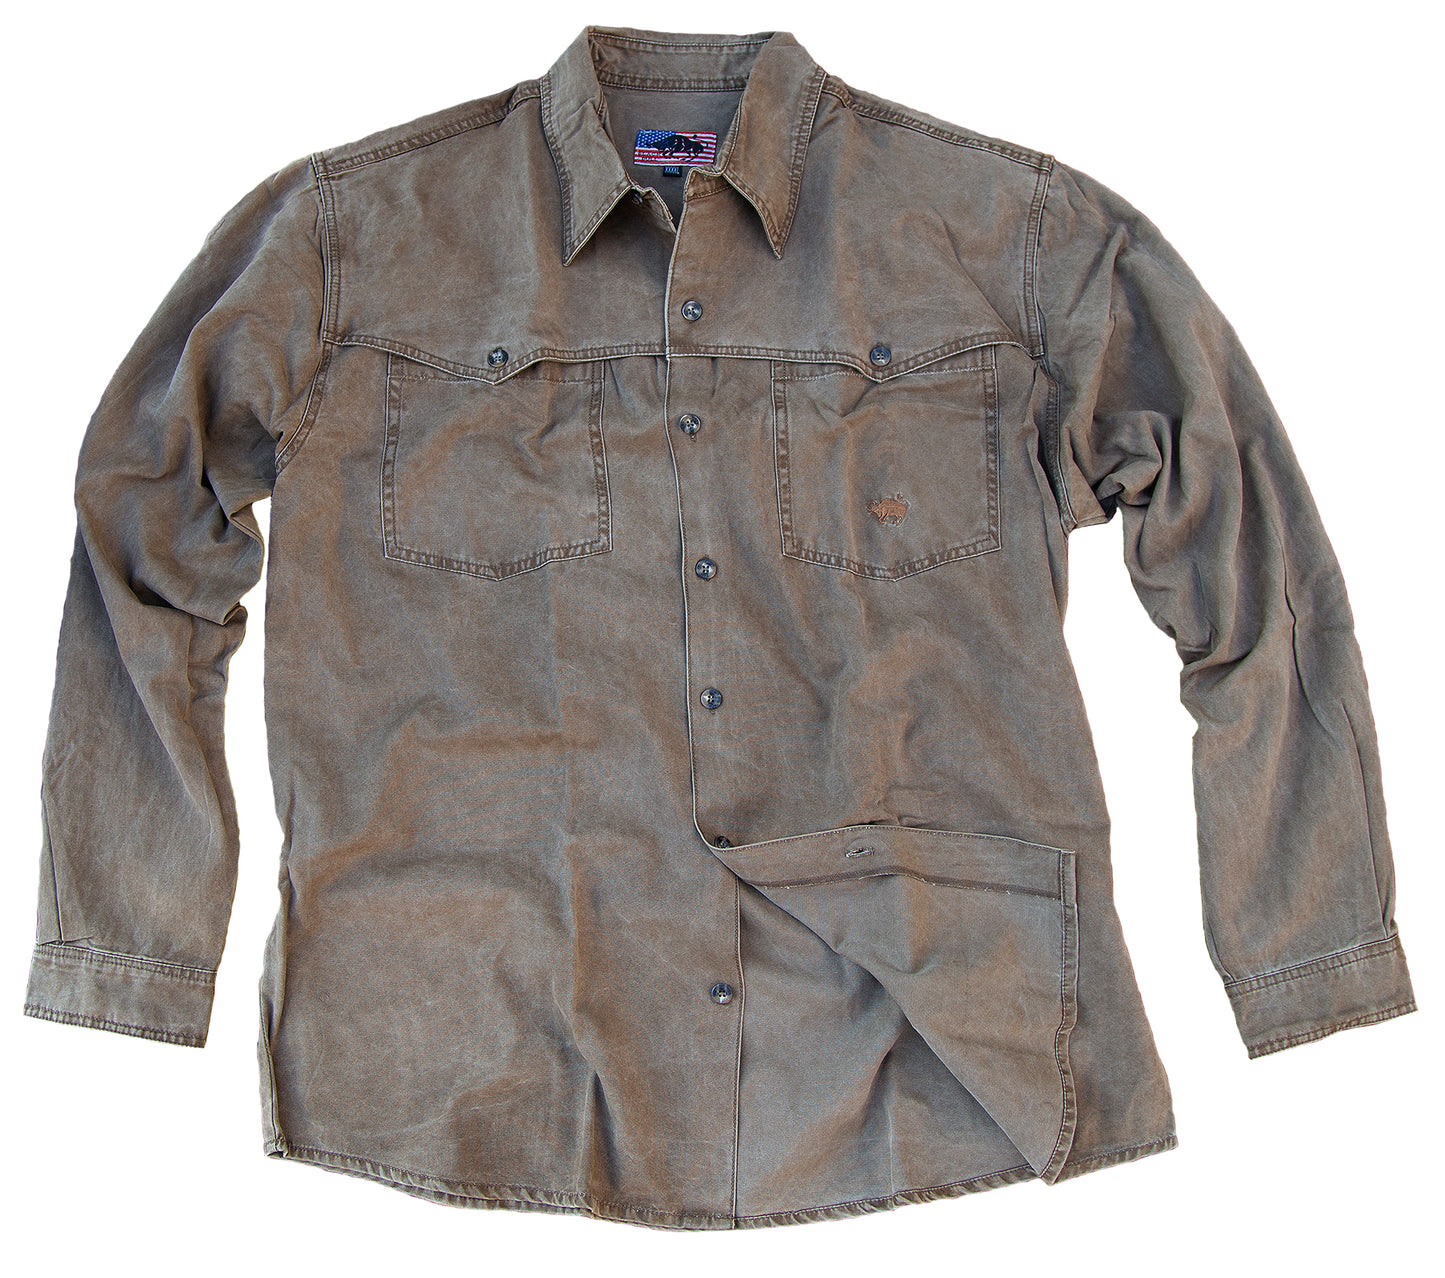 Robust Cowyboy men's shirt with a classic western edge above the chest